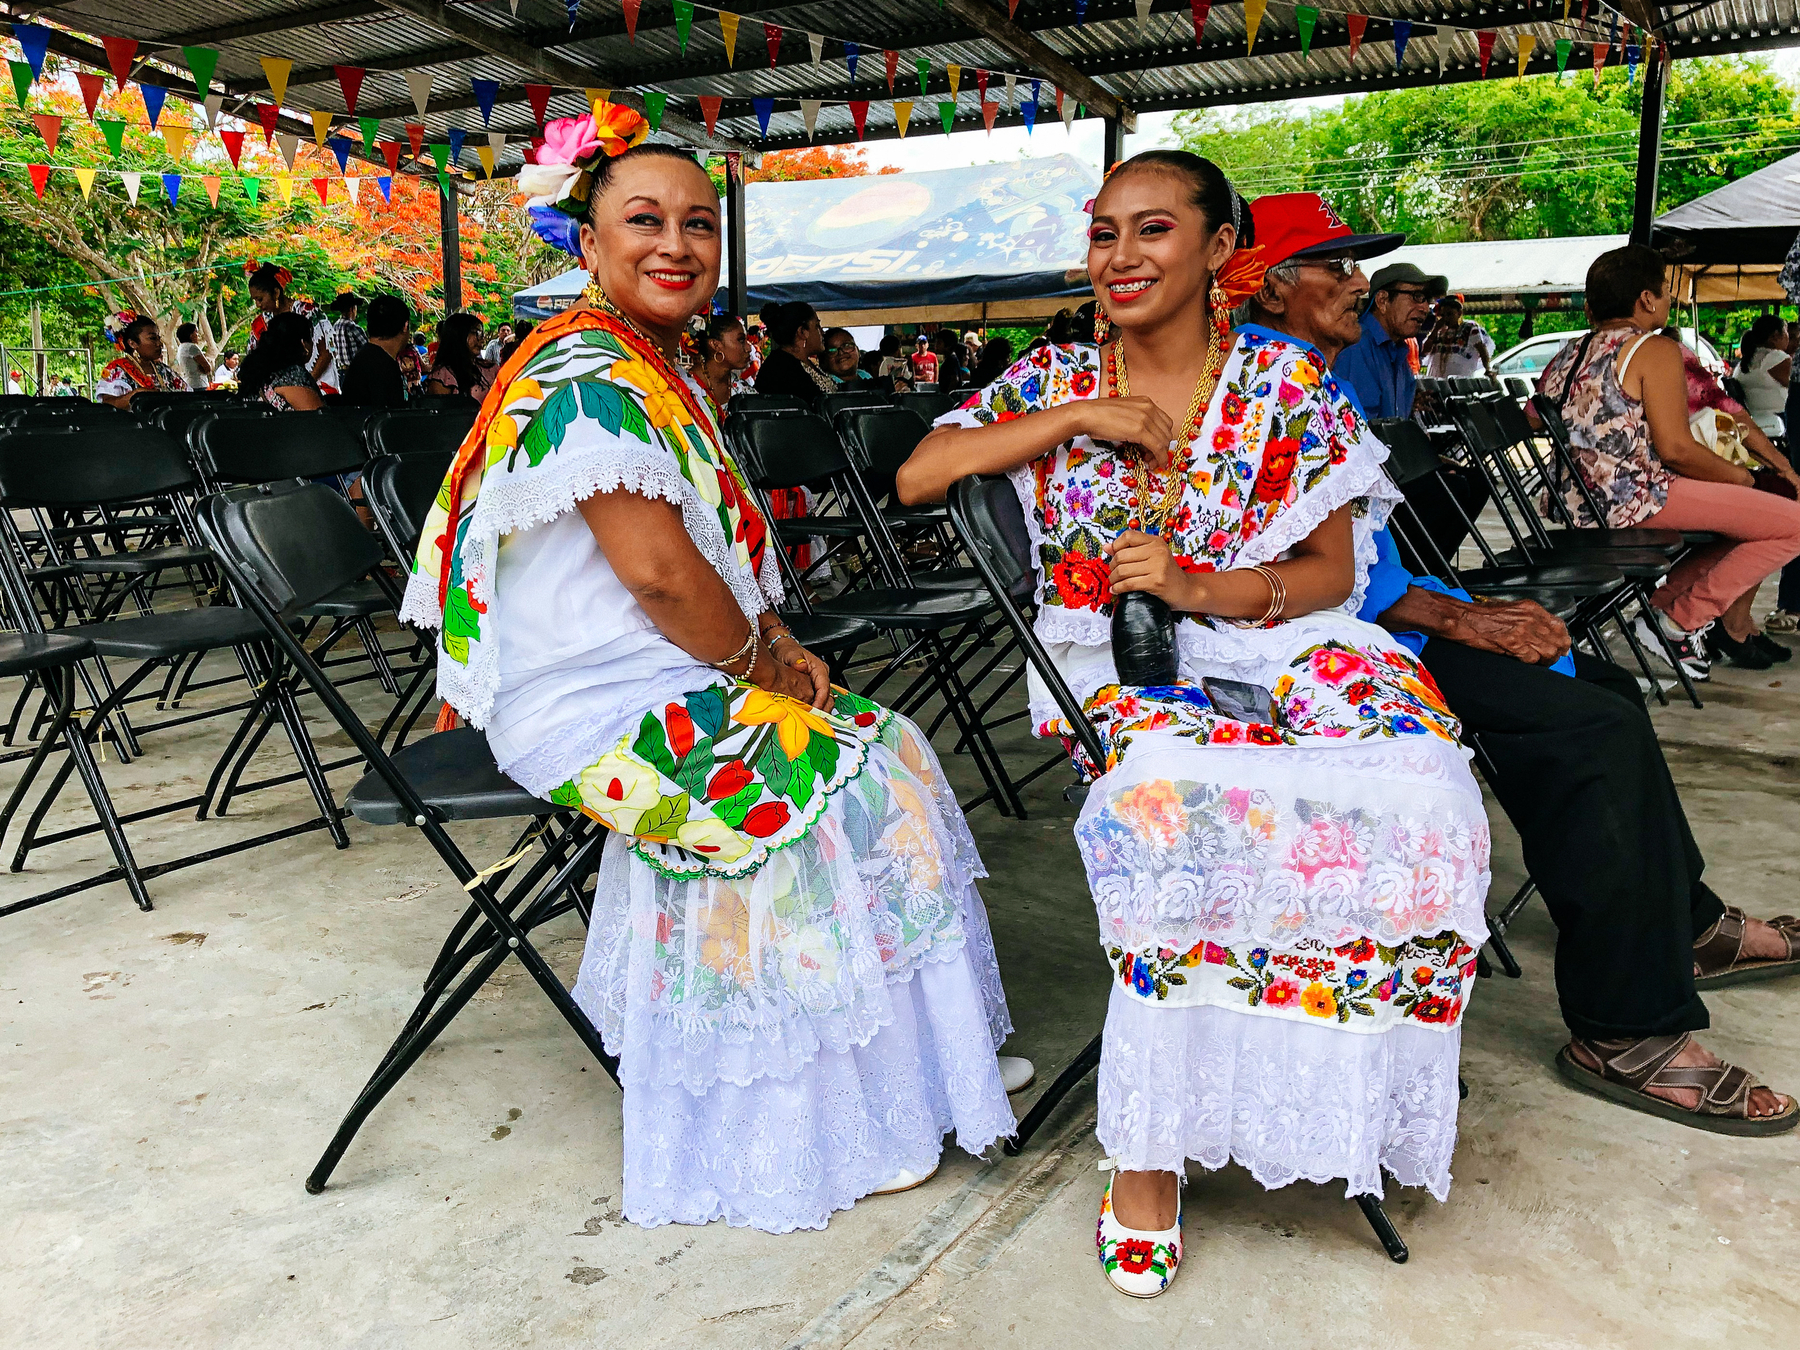 Two women in traditional Mexican dresses sit in chairs, in what looks like a party. 